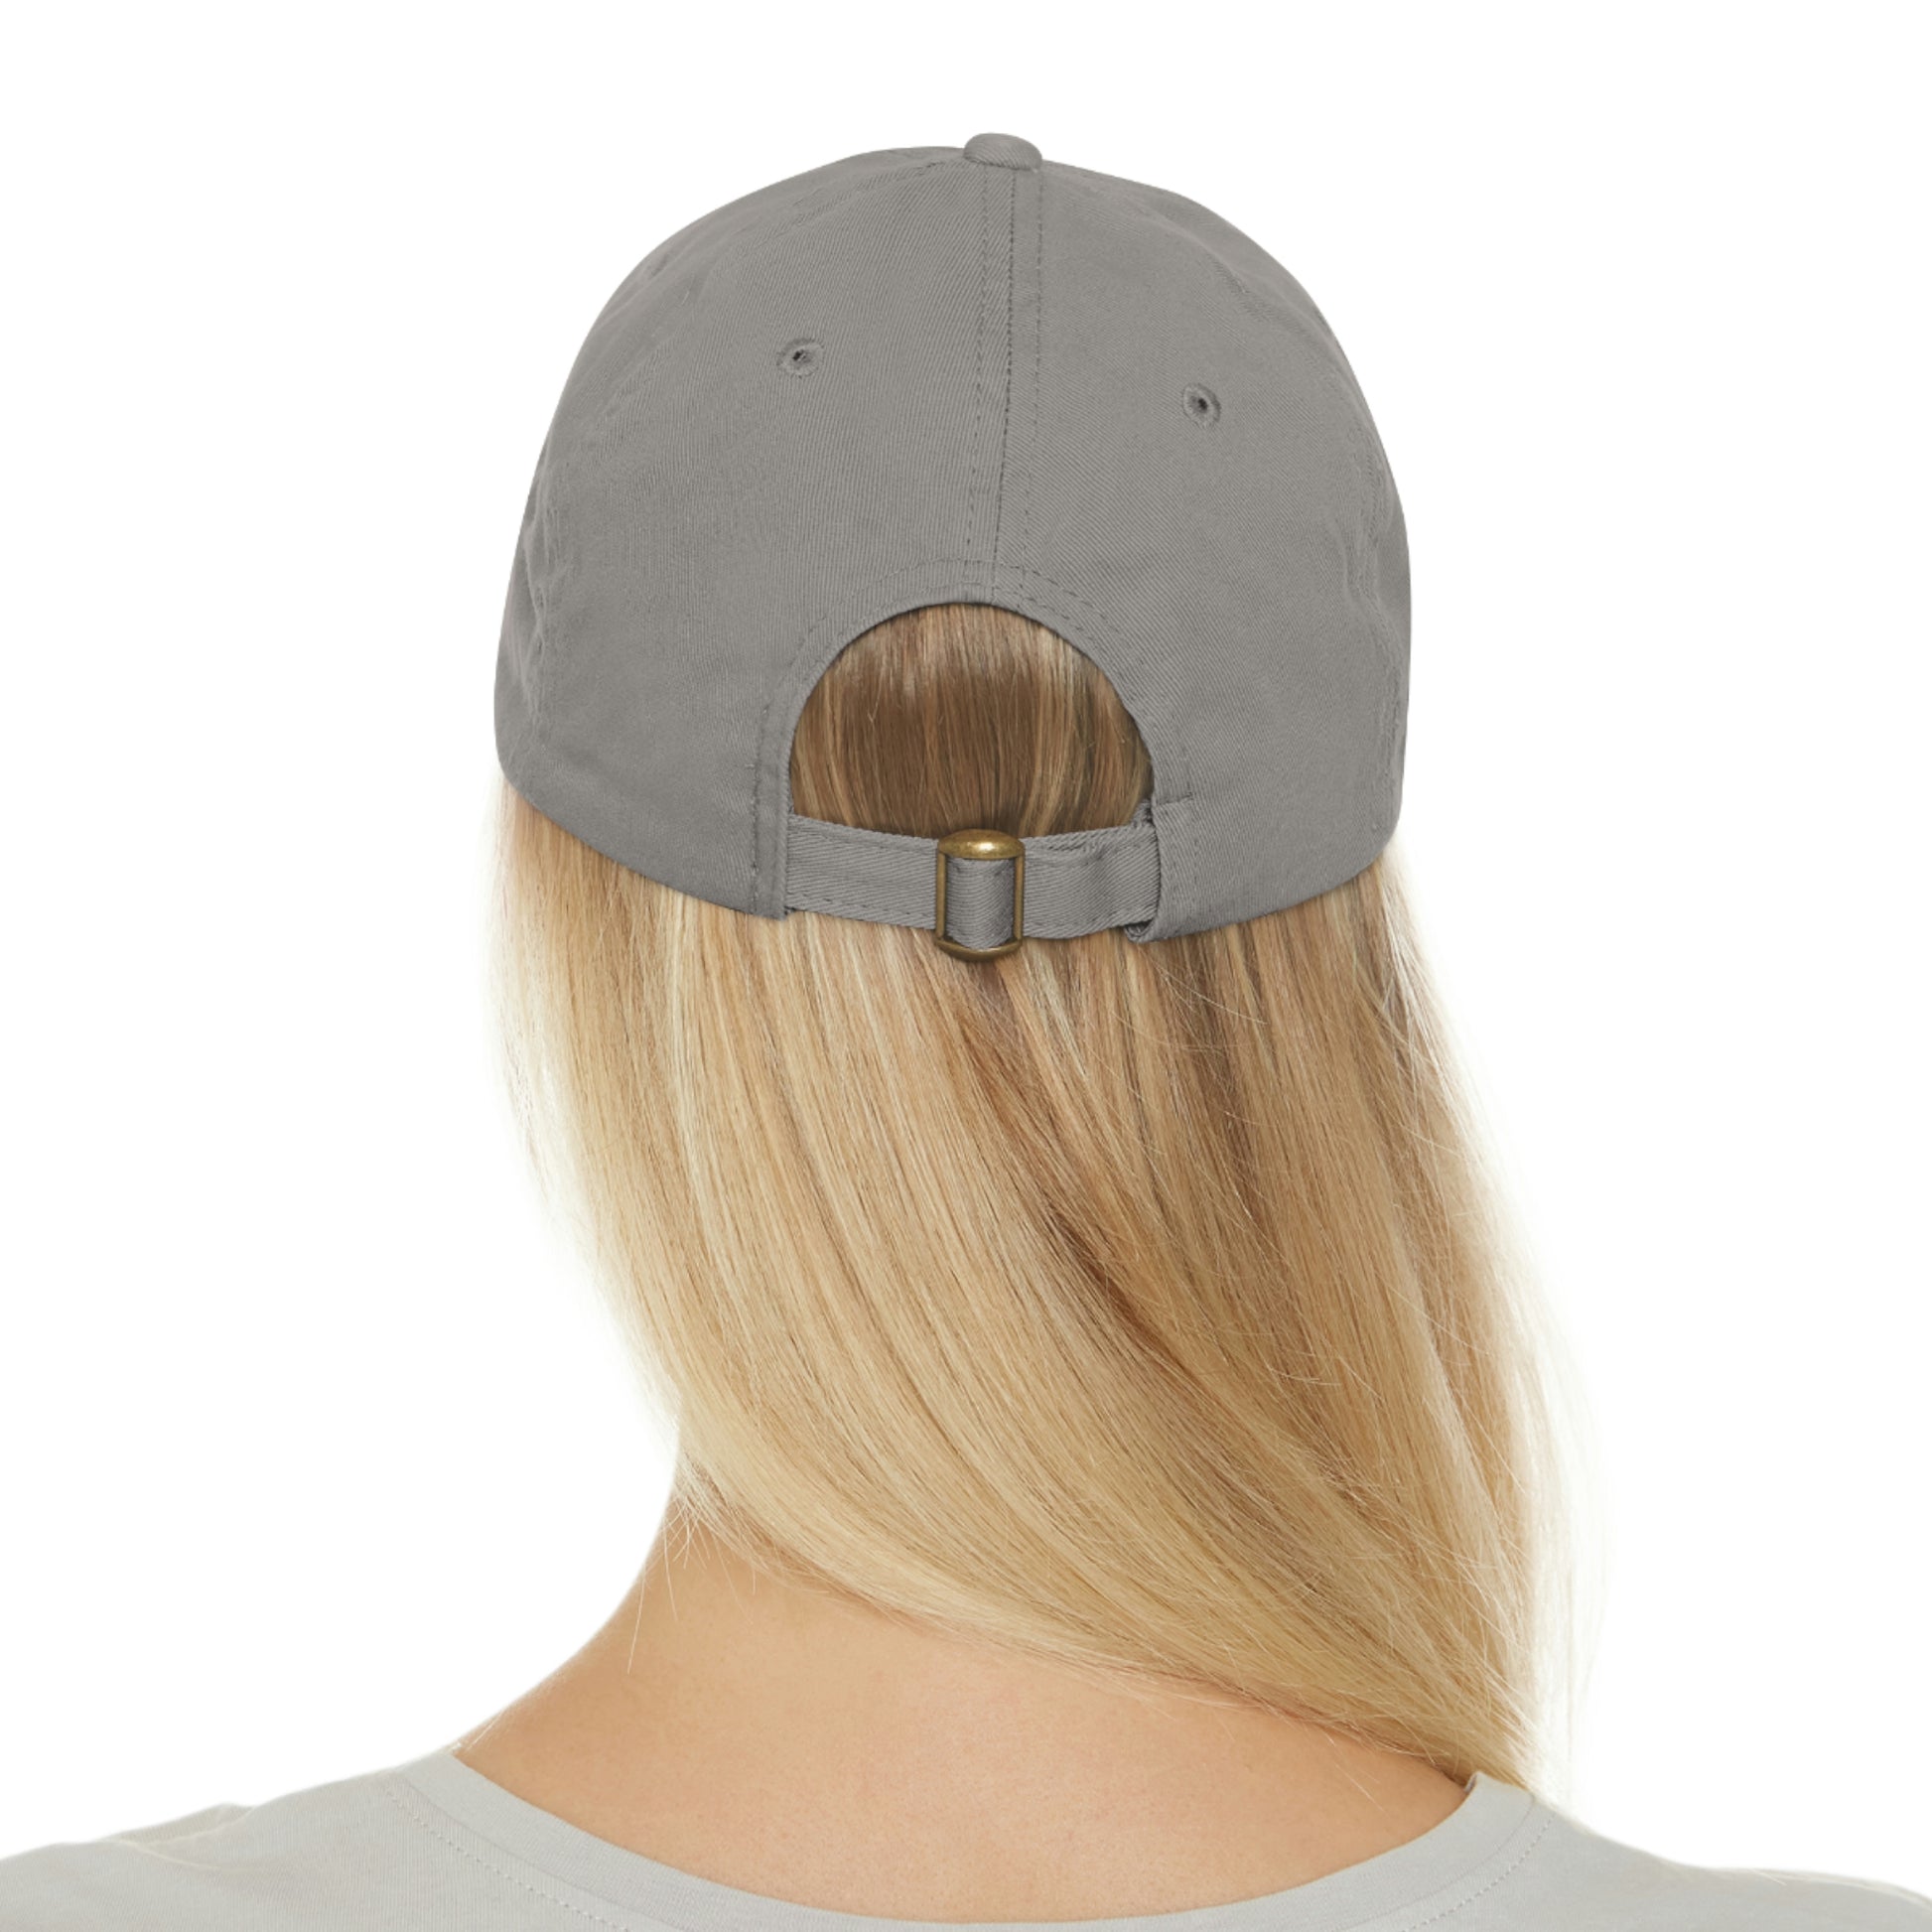 Miami Vibes Cap Grey / Pink patch Rectangle One size